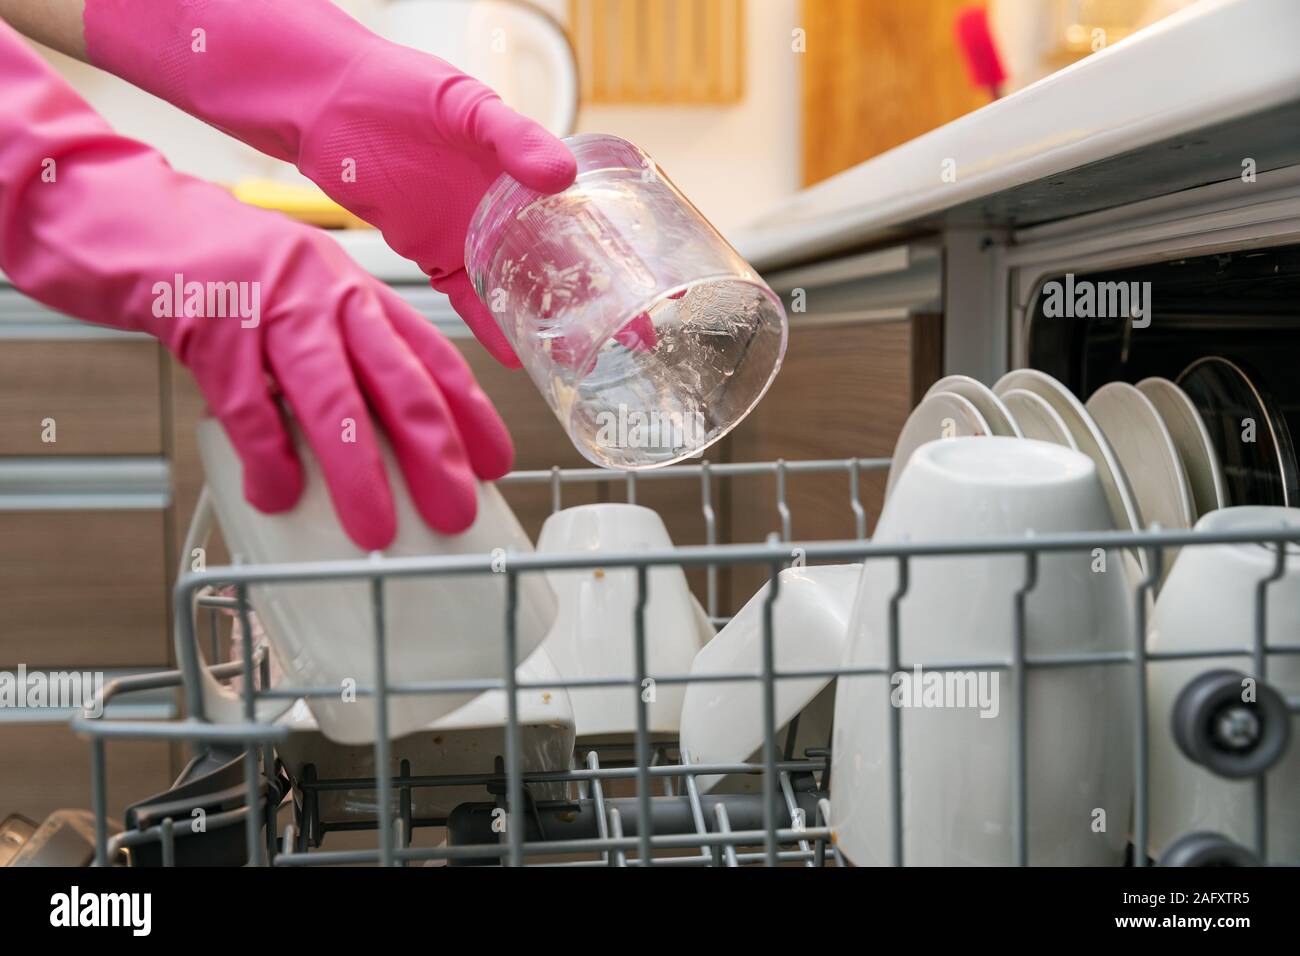 housewife putting dirty dishware in dishwasher rack at home kitchen Stock Photo